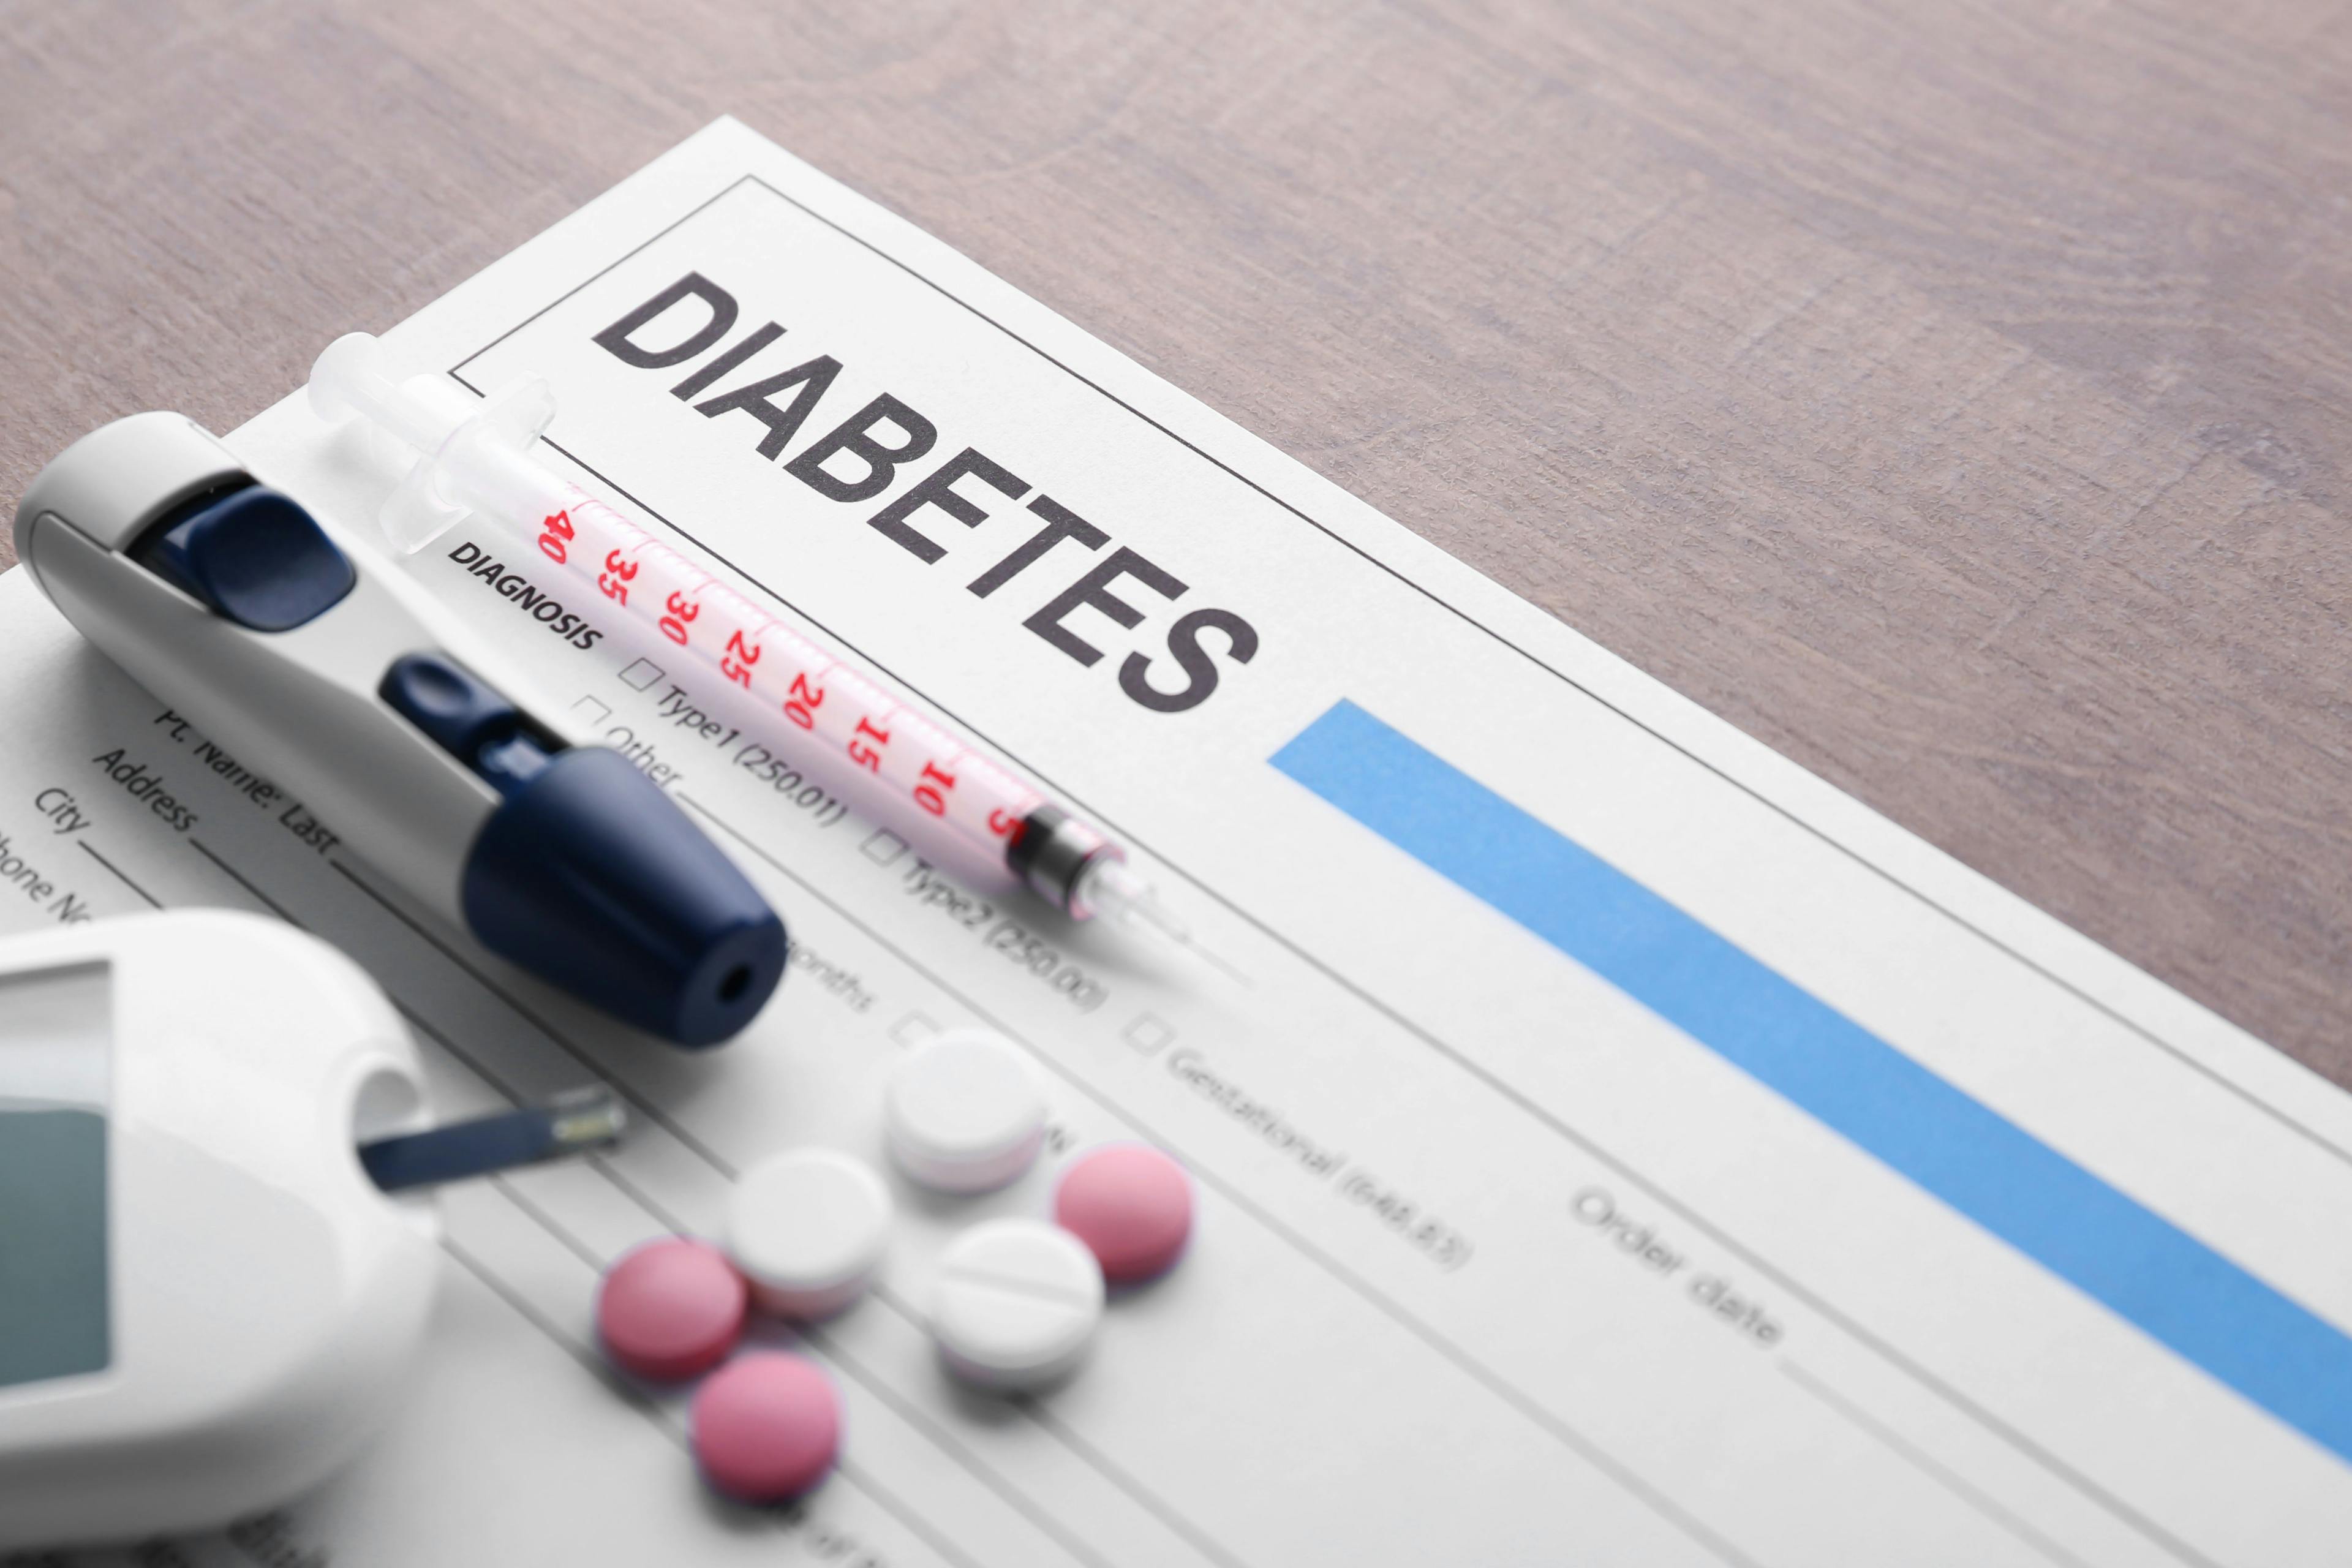 Improve diabetes prevention and care through obesity treatment